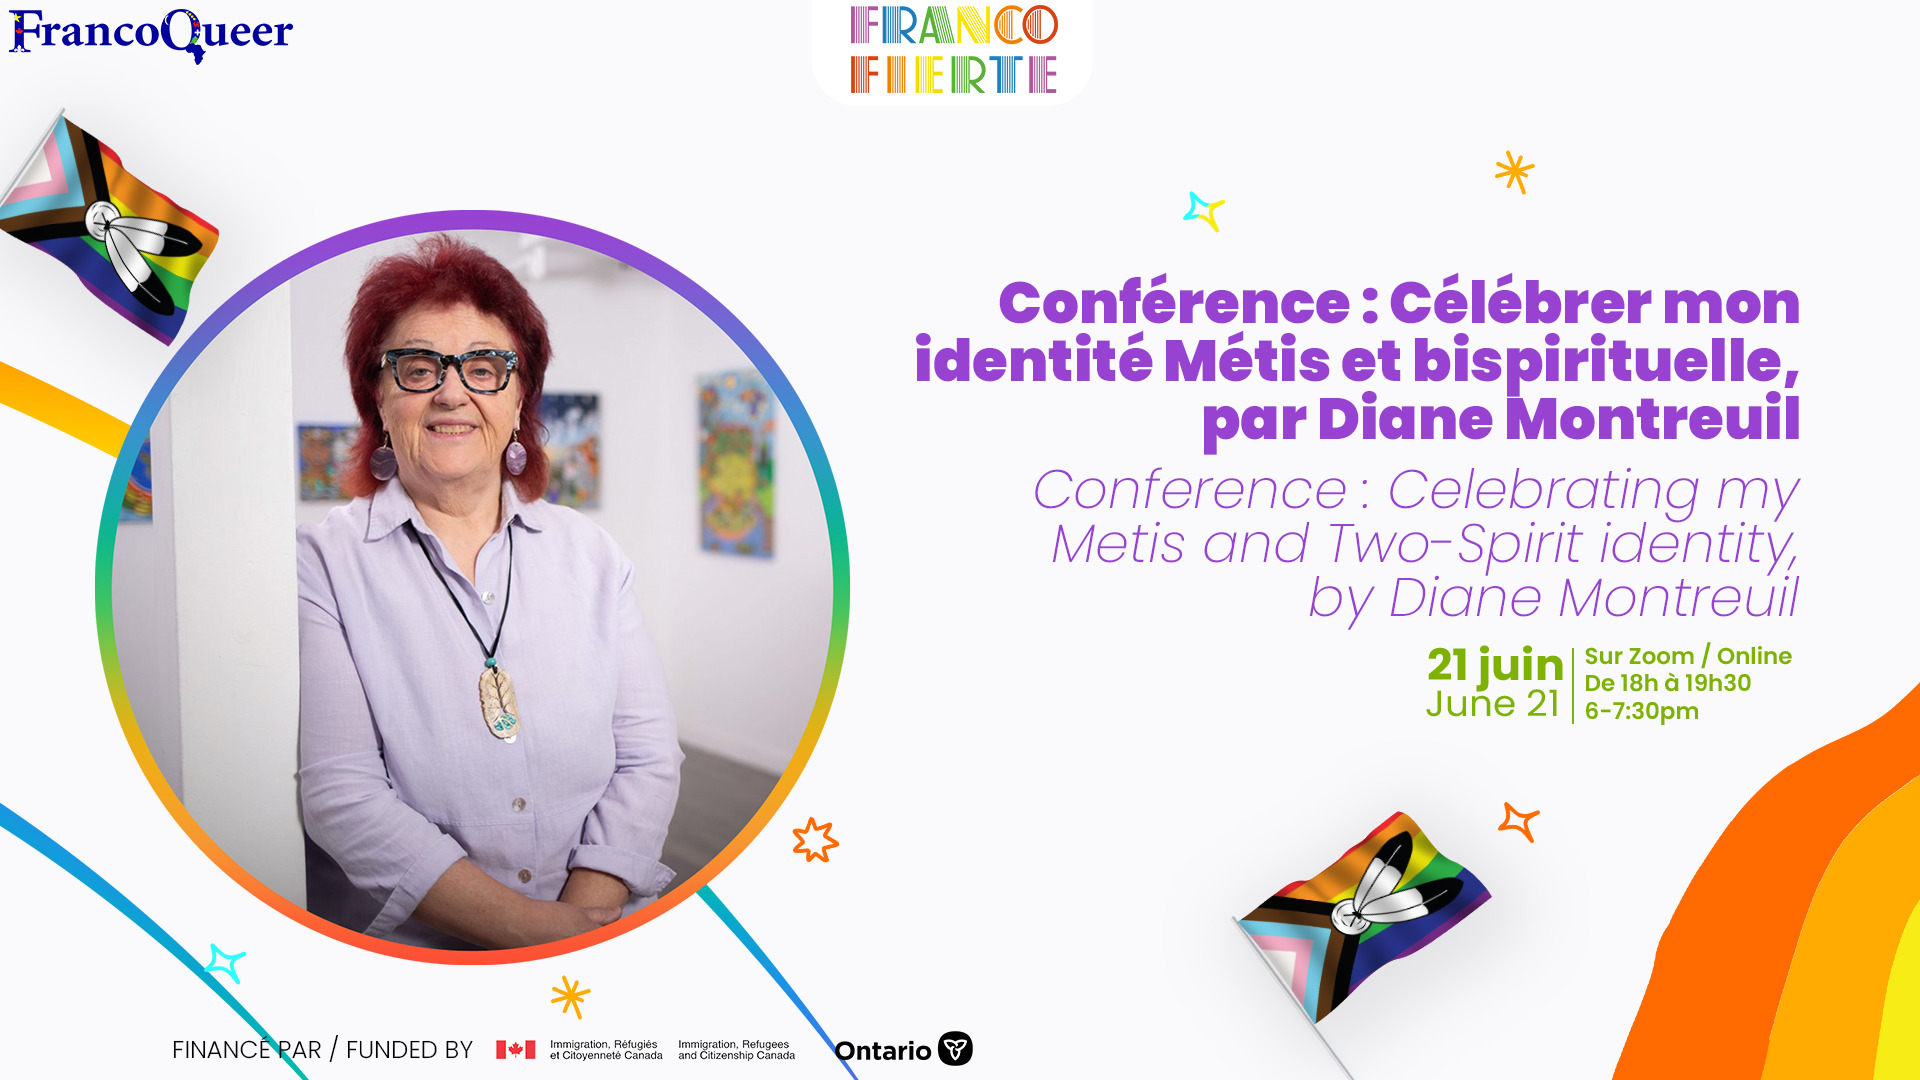 Conference: Celebrating my Metis and Two-Spirit identity, by Diane Montreuil Event